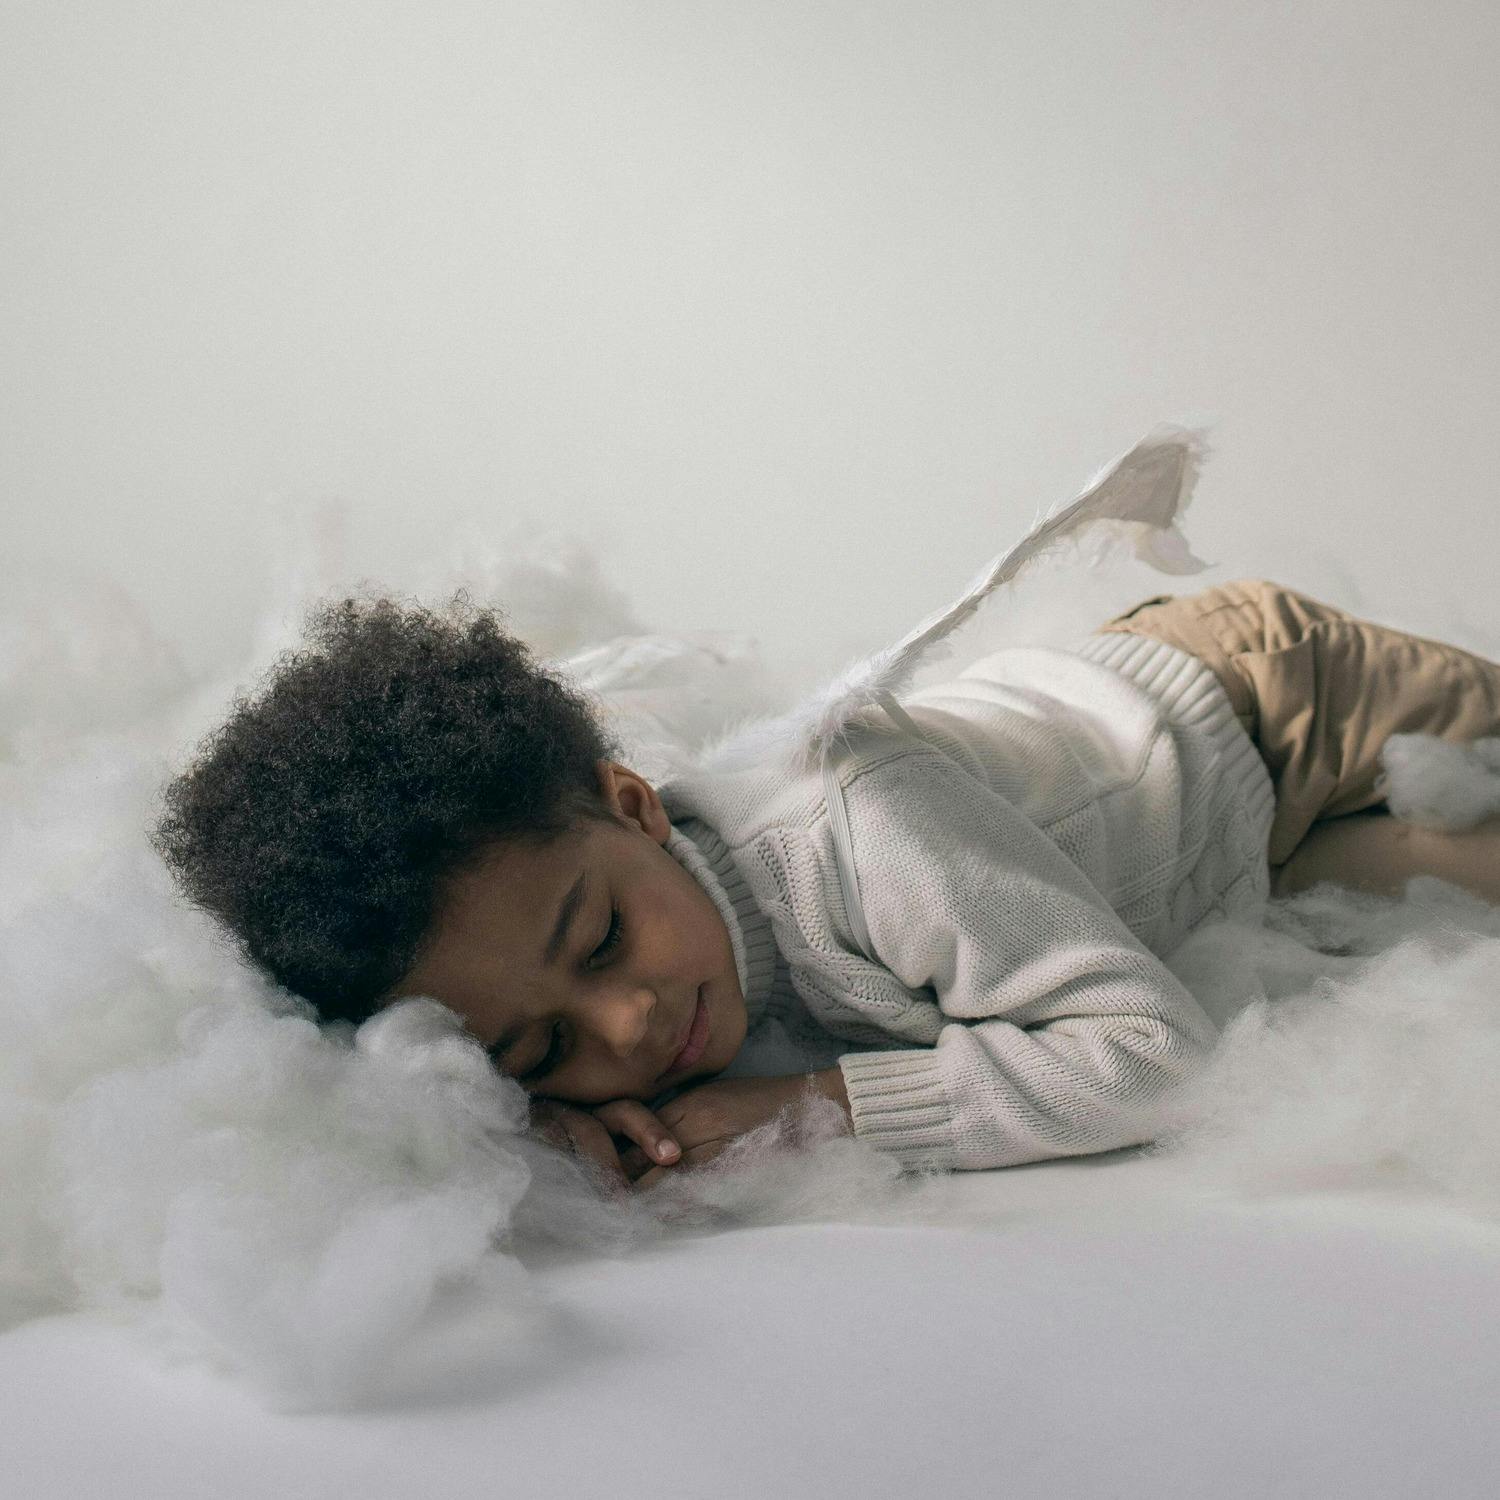 Photo of a winged child sleeping on clouds.